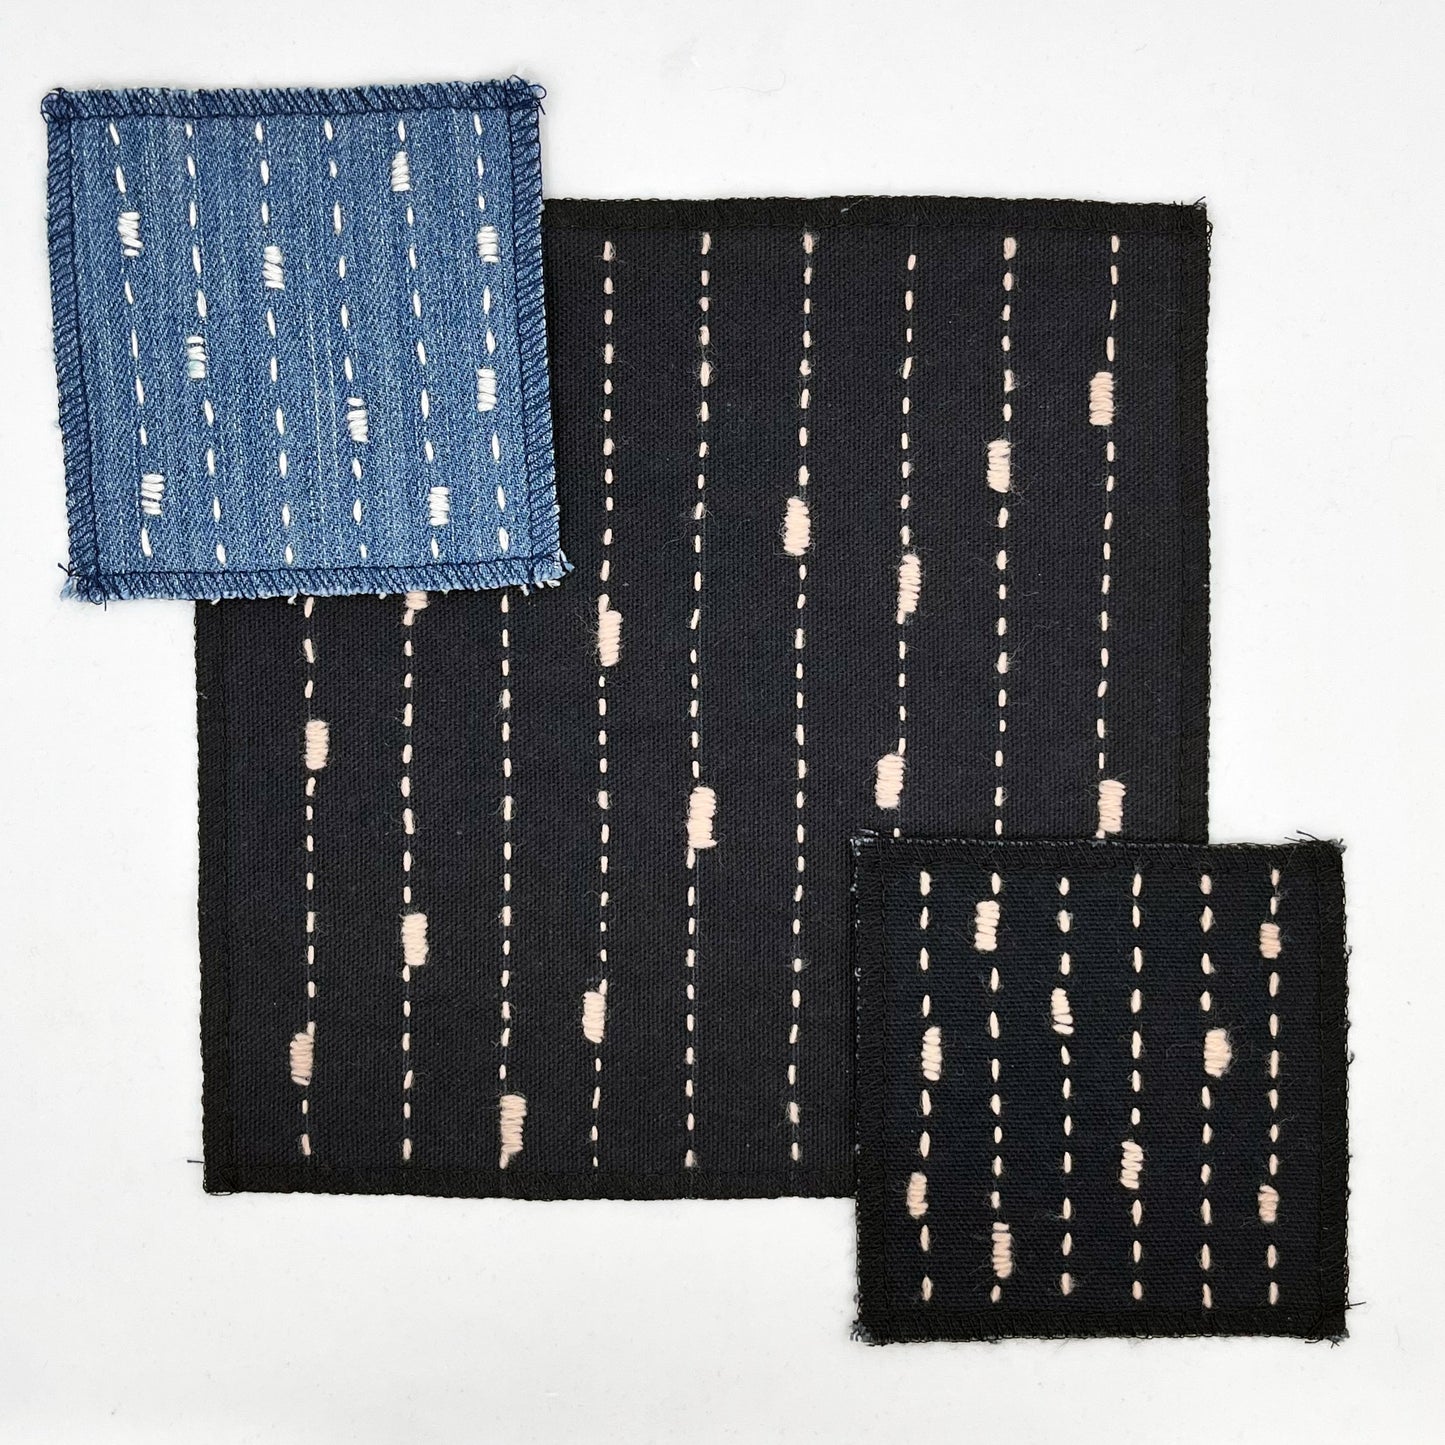 a group of 3 square patches made out of denim and black canvas, handstitched in ivory (on the denim) and peach (on the black) running stitches with randomly placed small rectangles made of stitches running the other direction, on a white background